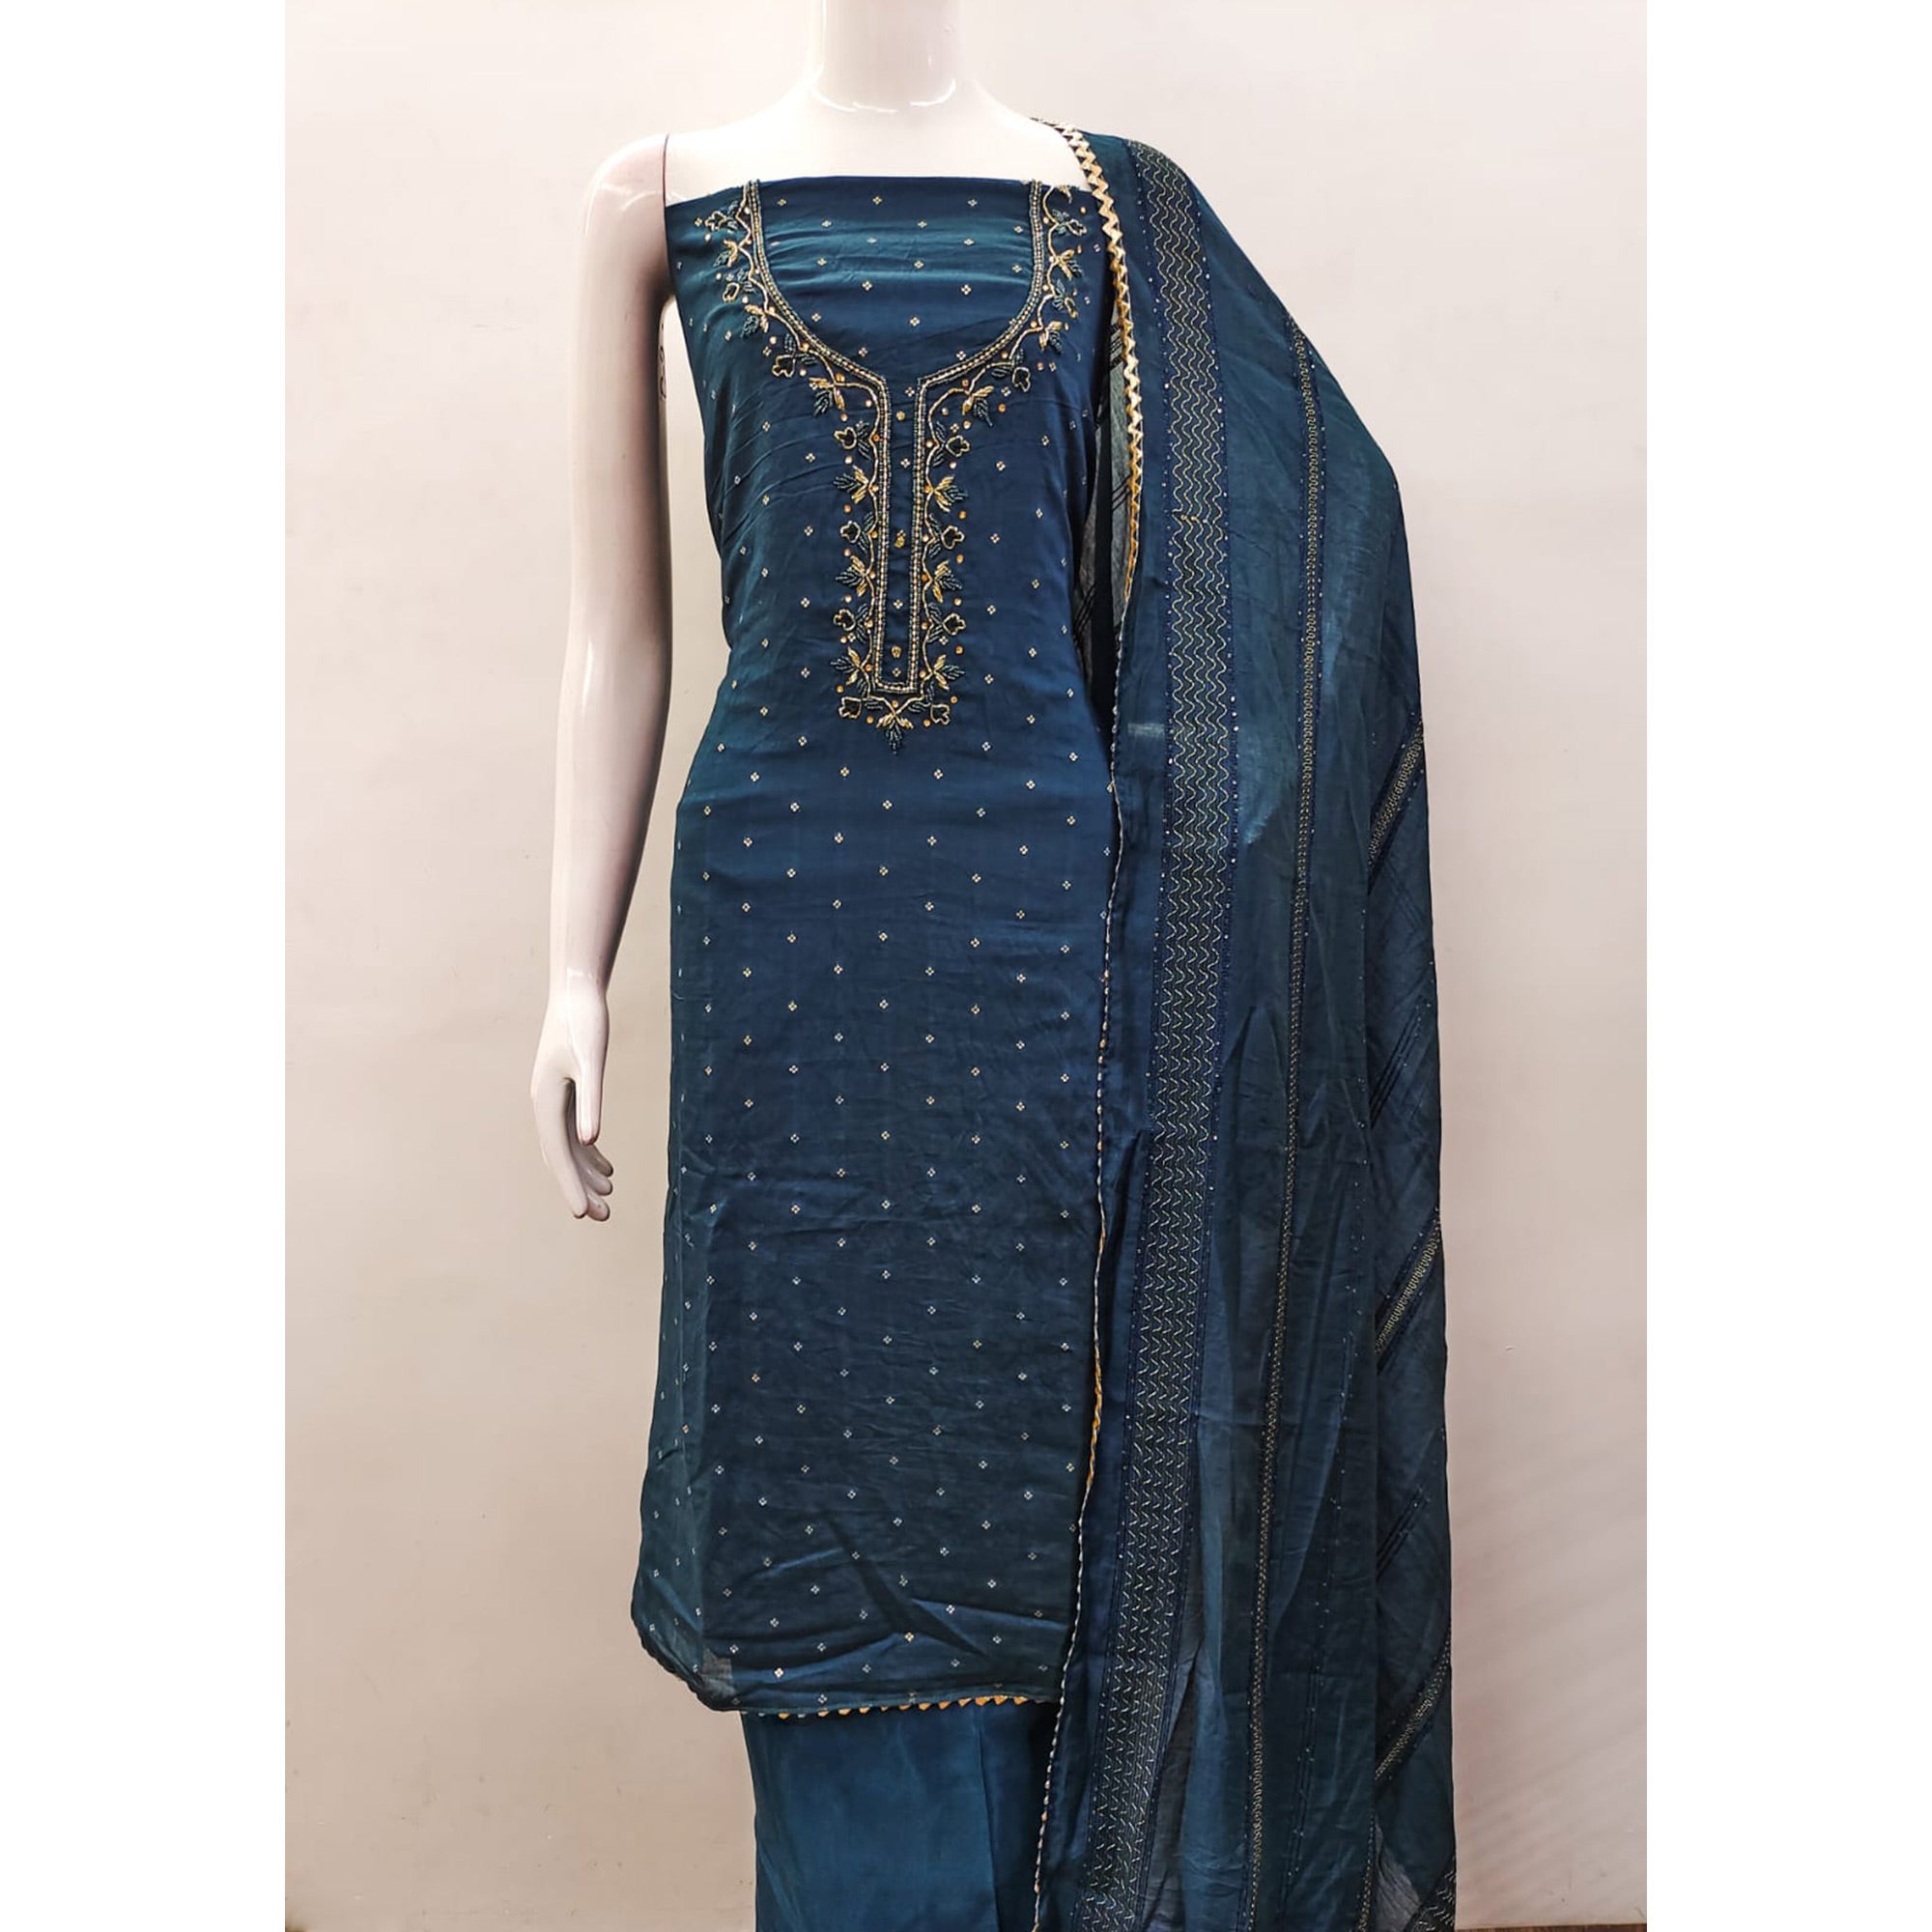 Morpich Butti With Hand Embroidered Jacquard Dress Material